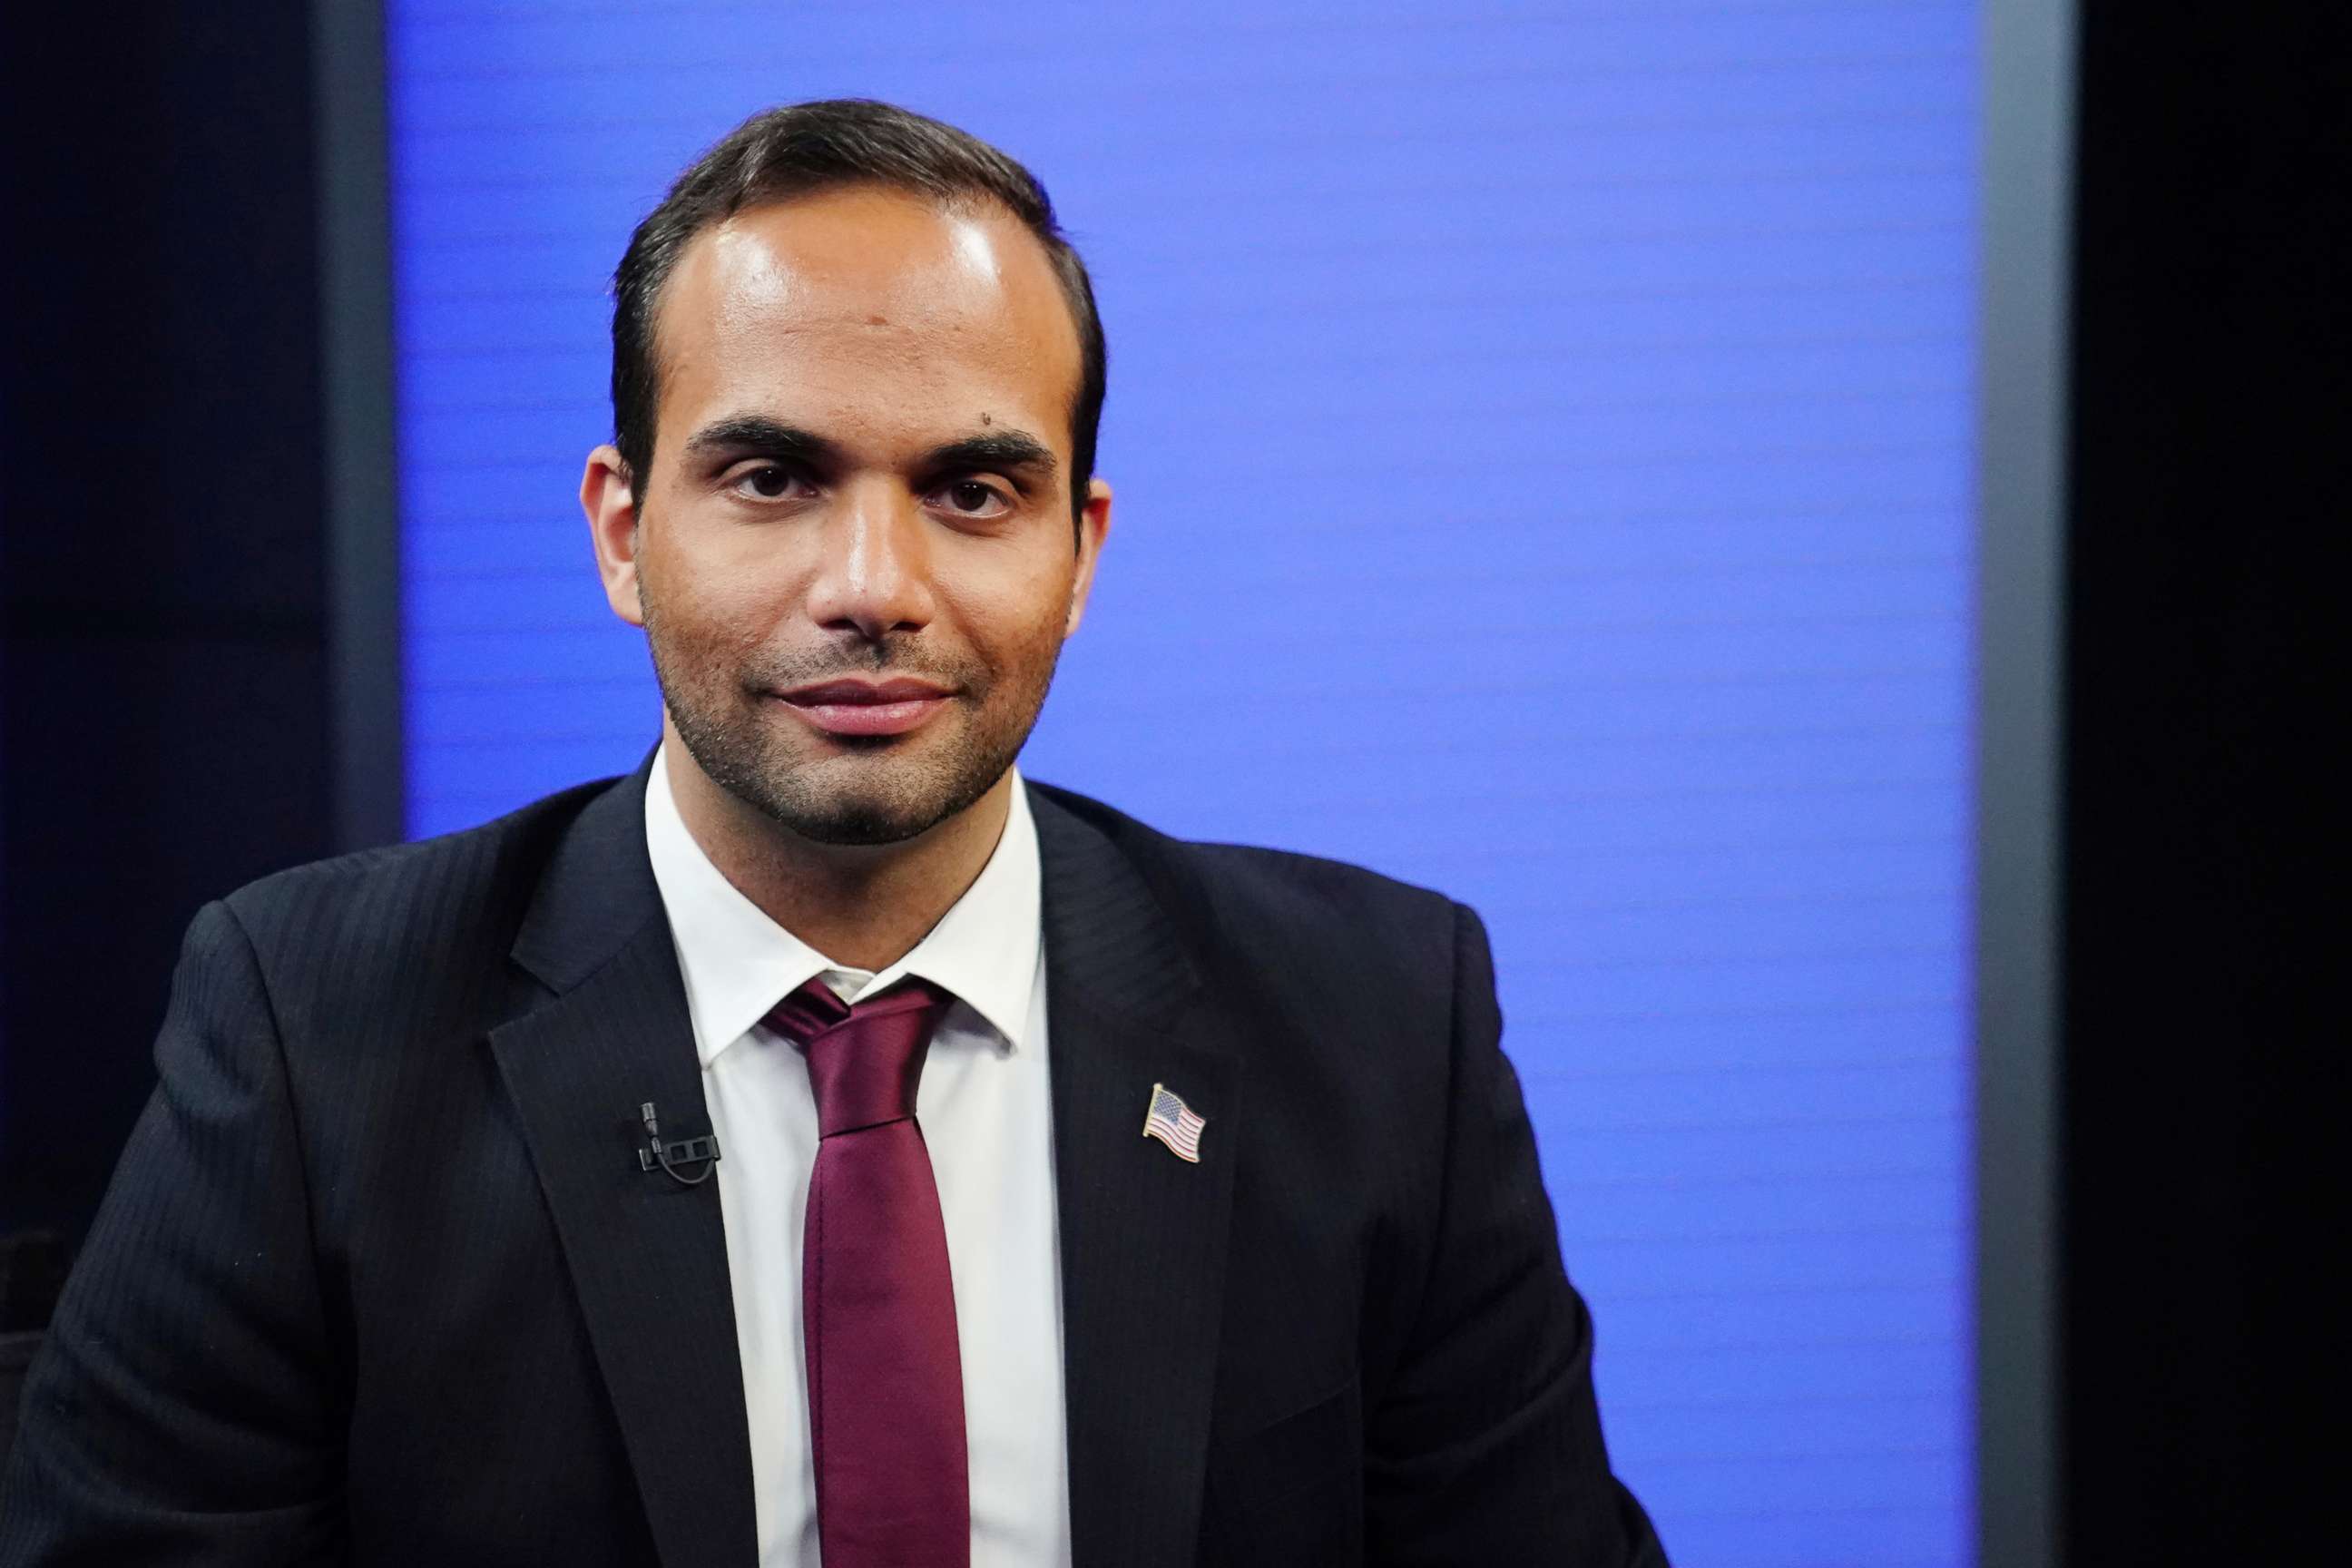 PHOTO: In this March 26, 2019, file photo, George Papadopoulos, a former member of the foreign policy panel to Donald Trump's 2016 presidential campaign, poses for a photo before a TV interview in New York.